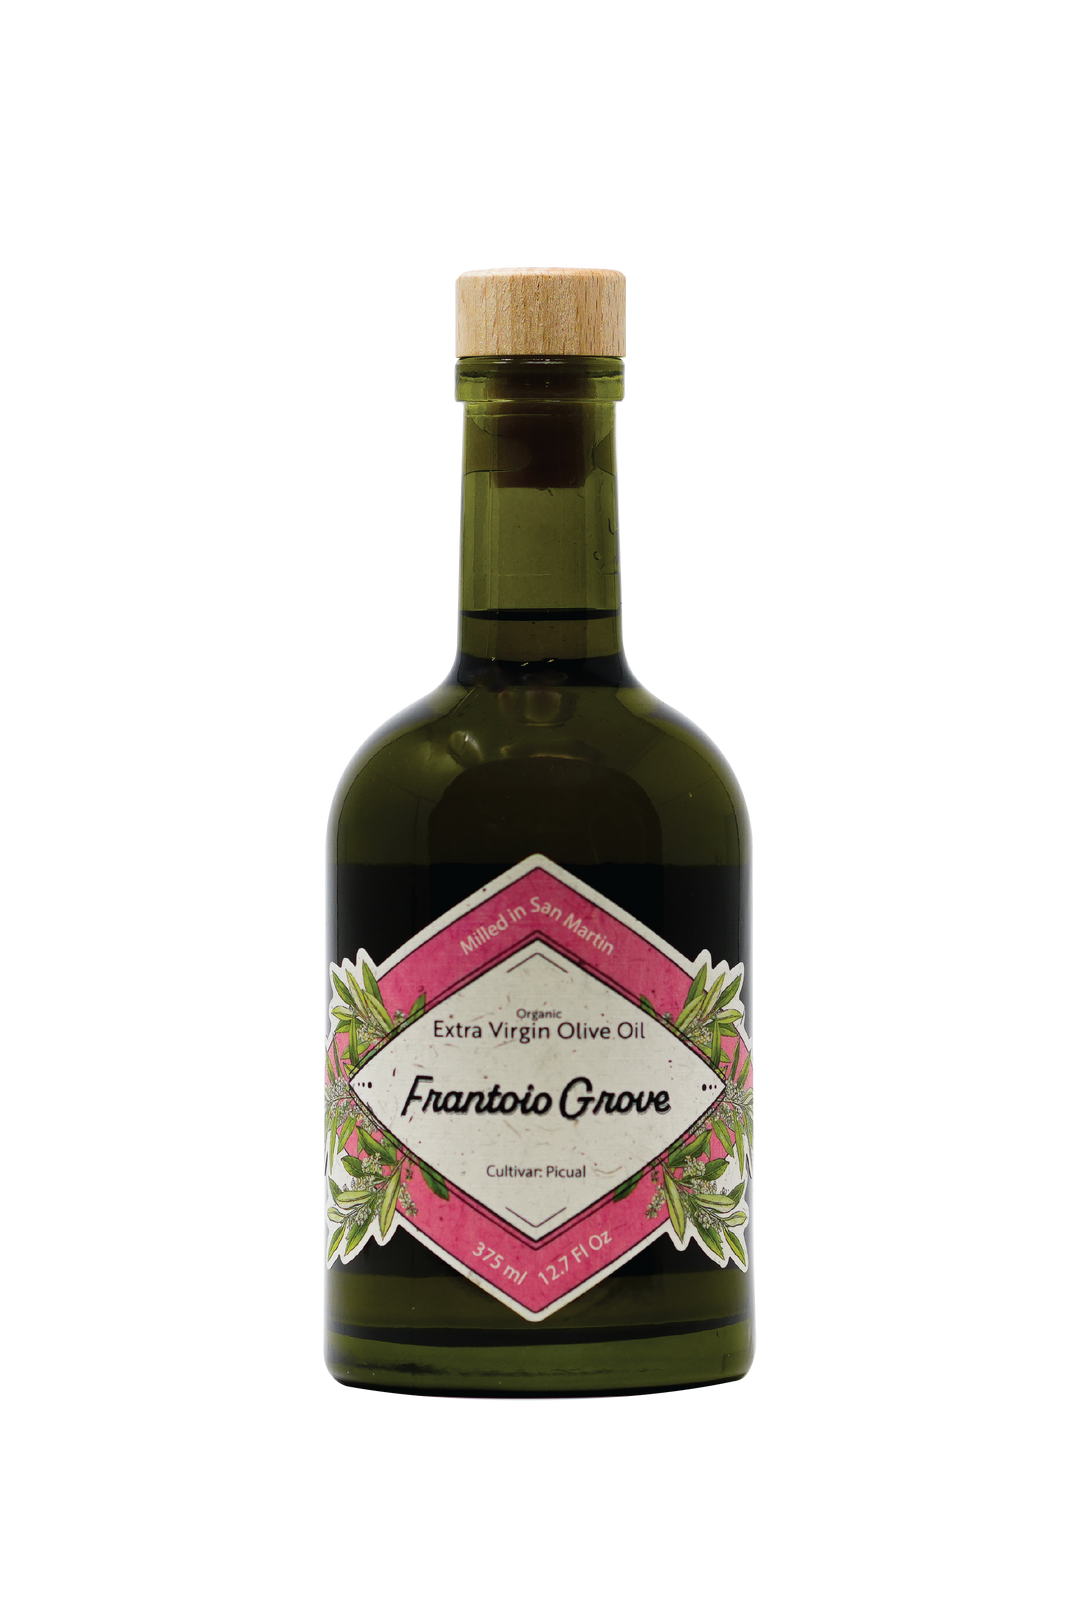 An Image Of A 375 ml/12.7 Fl Oz bottle of Frantoio Grove's Organic Picual Extra Virgin Olive Oil With White Background. Pink and white diamond-shaped label with olive blossoms and leaves. Additional text on label reads: Milled in San Martin. Organic Extra Virgin Olive Oil. Cultivar: Picual.